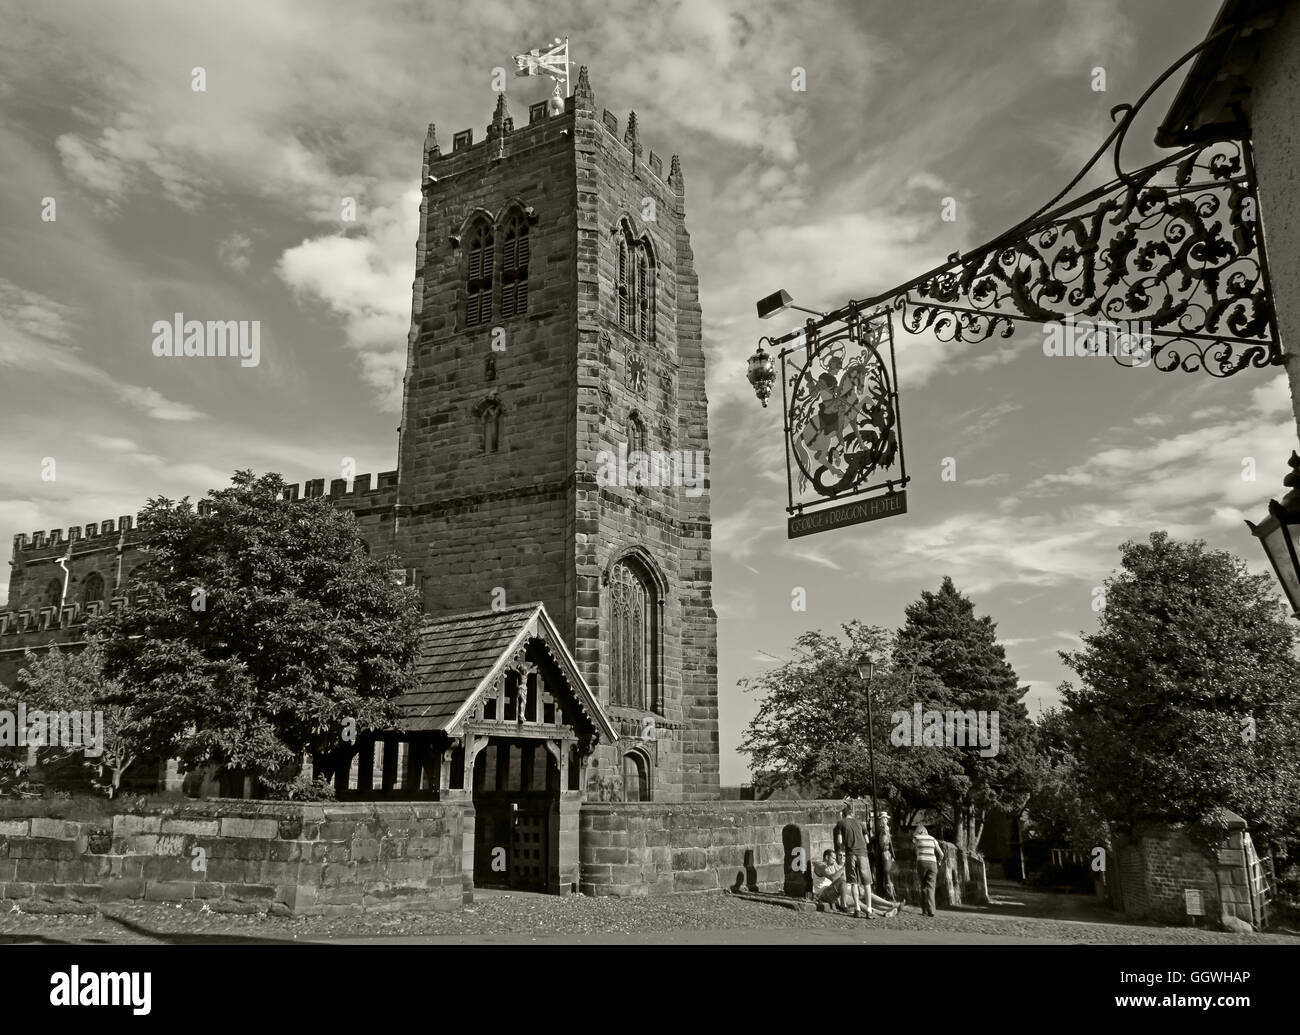 George and Dragon wrought iron sign and St Marys Church,Great Budworth,Cheshire,England, UK - Monochrome Sepia Stock Photo